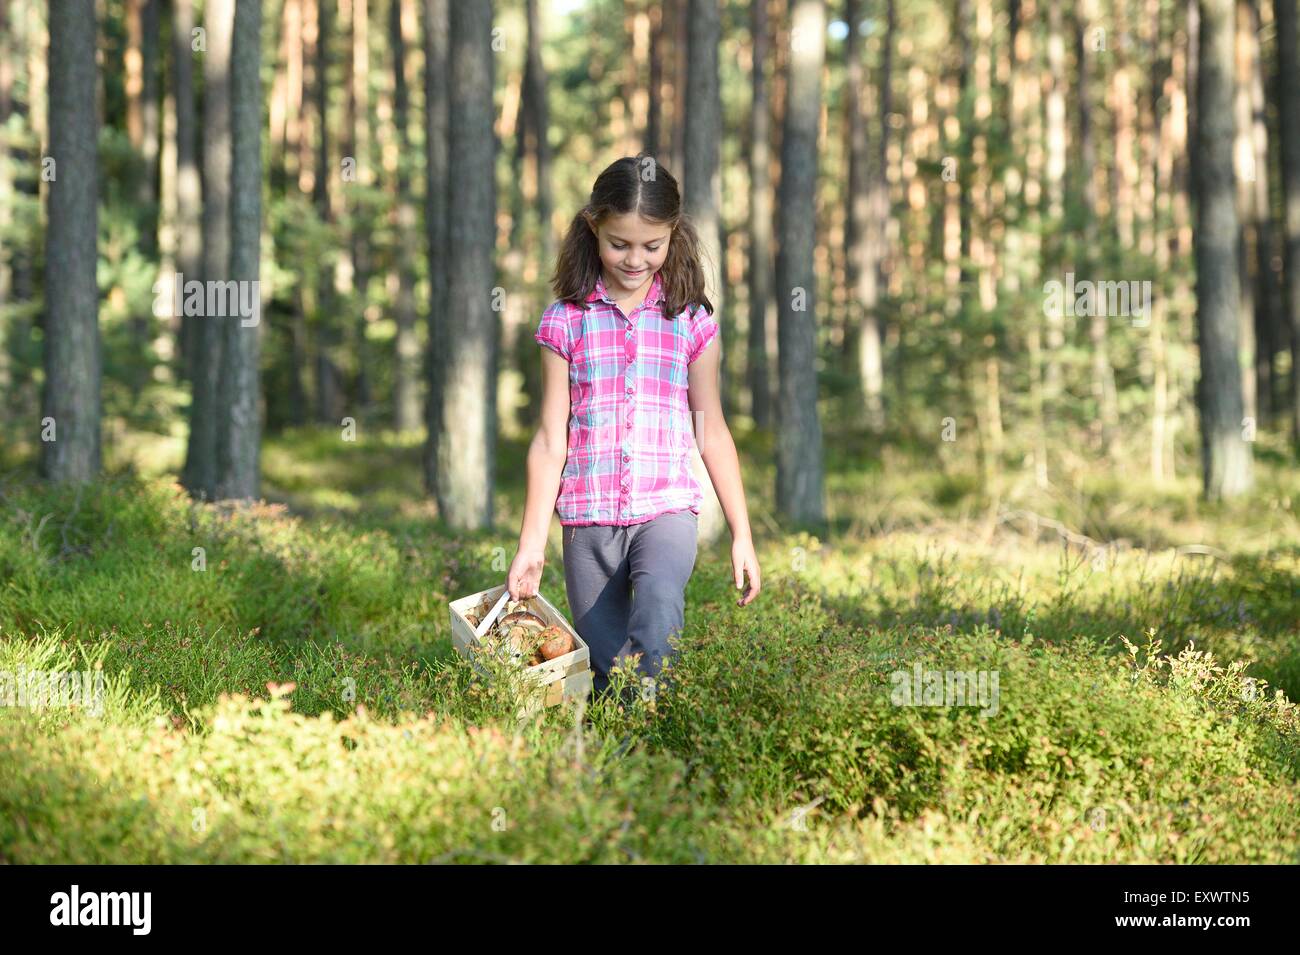 Girl collecting mushrooms in a pine forest Stock Photo